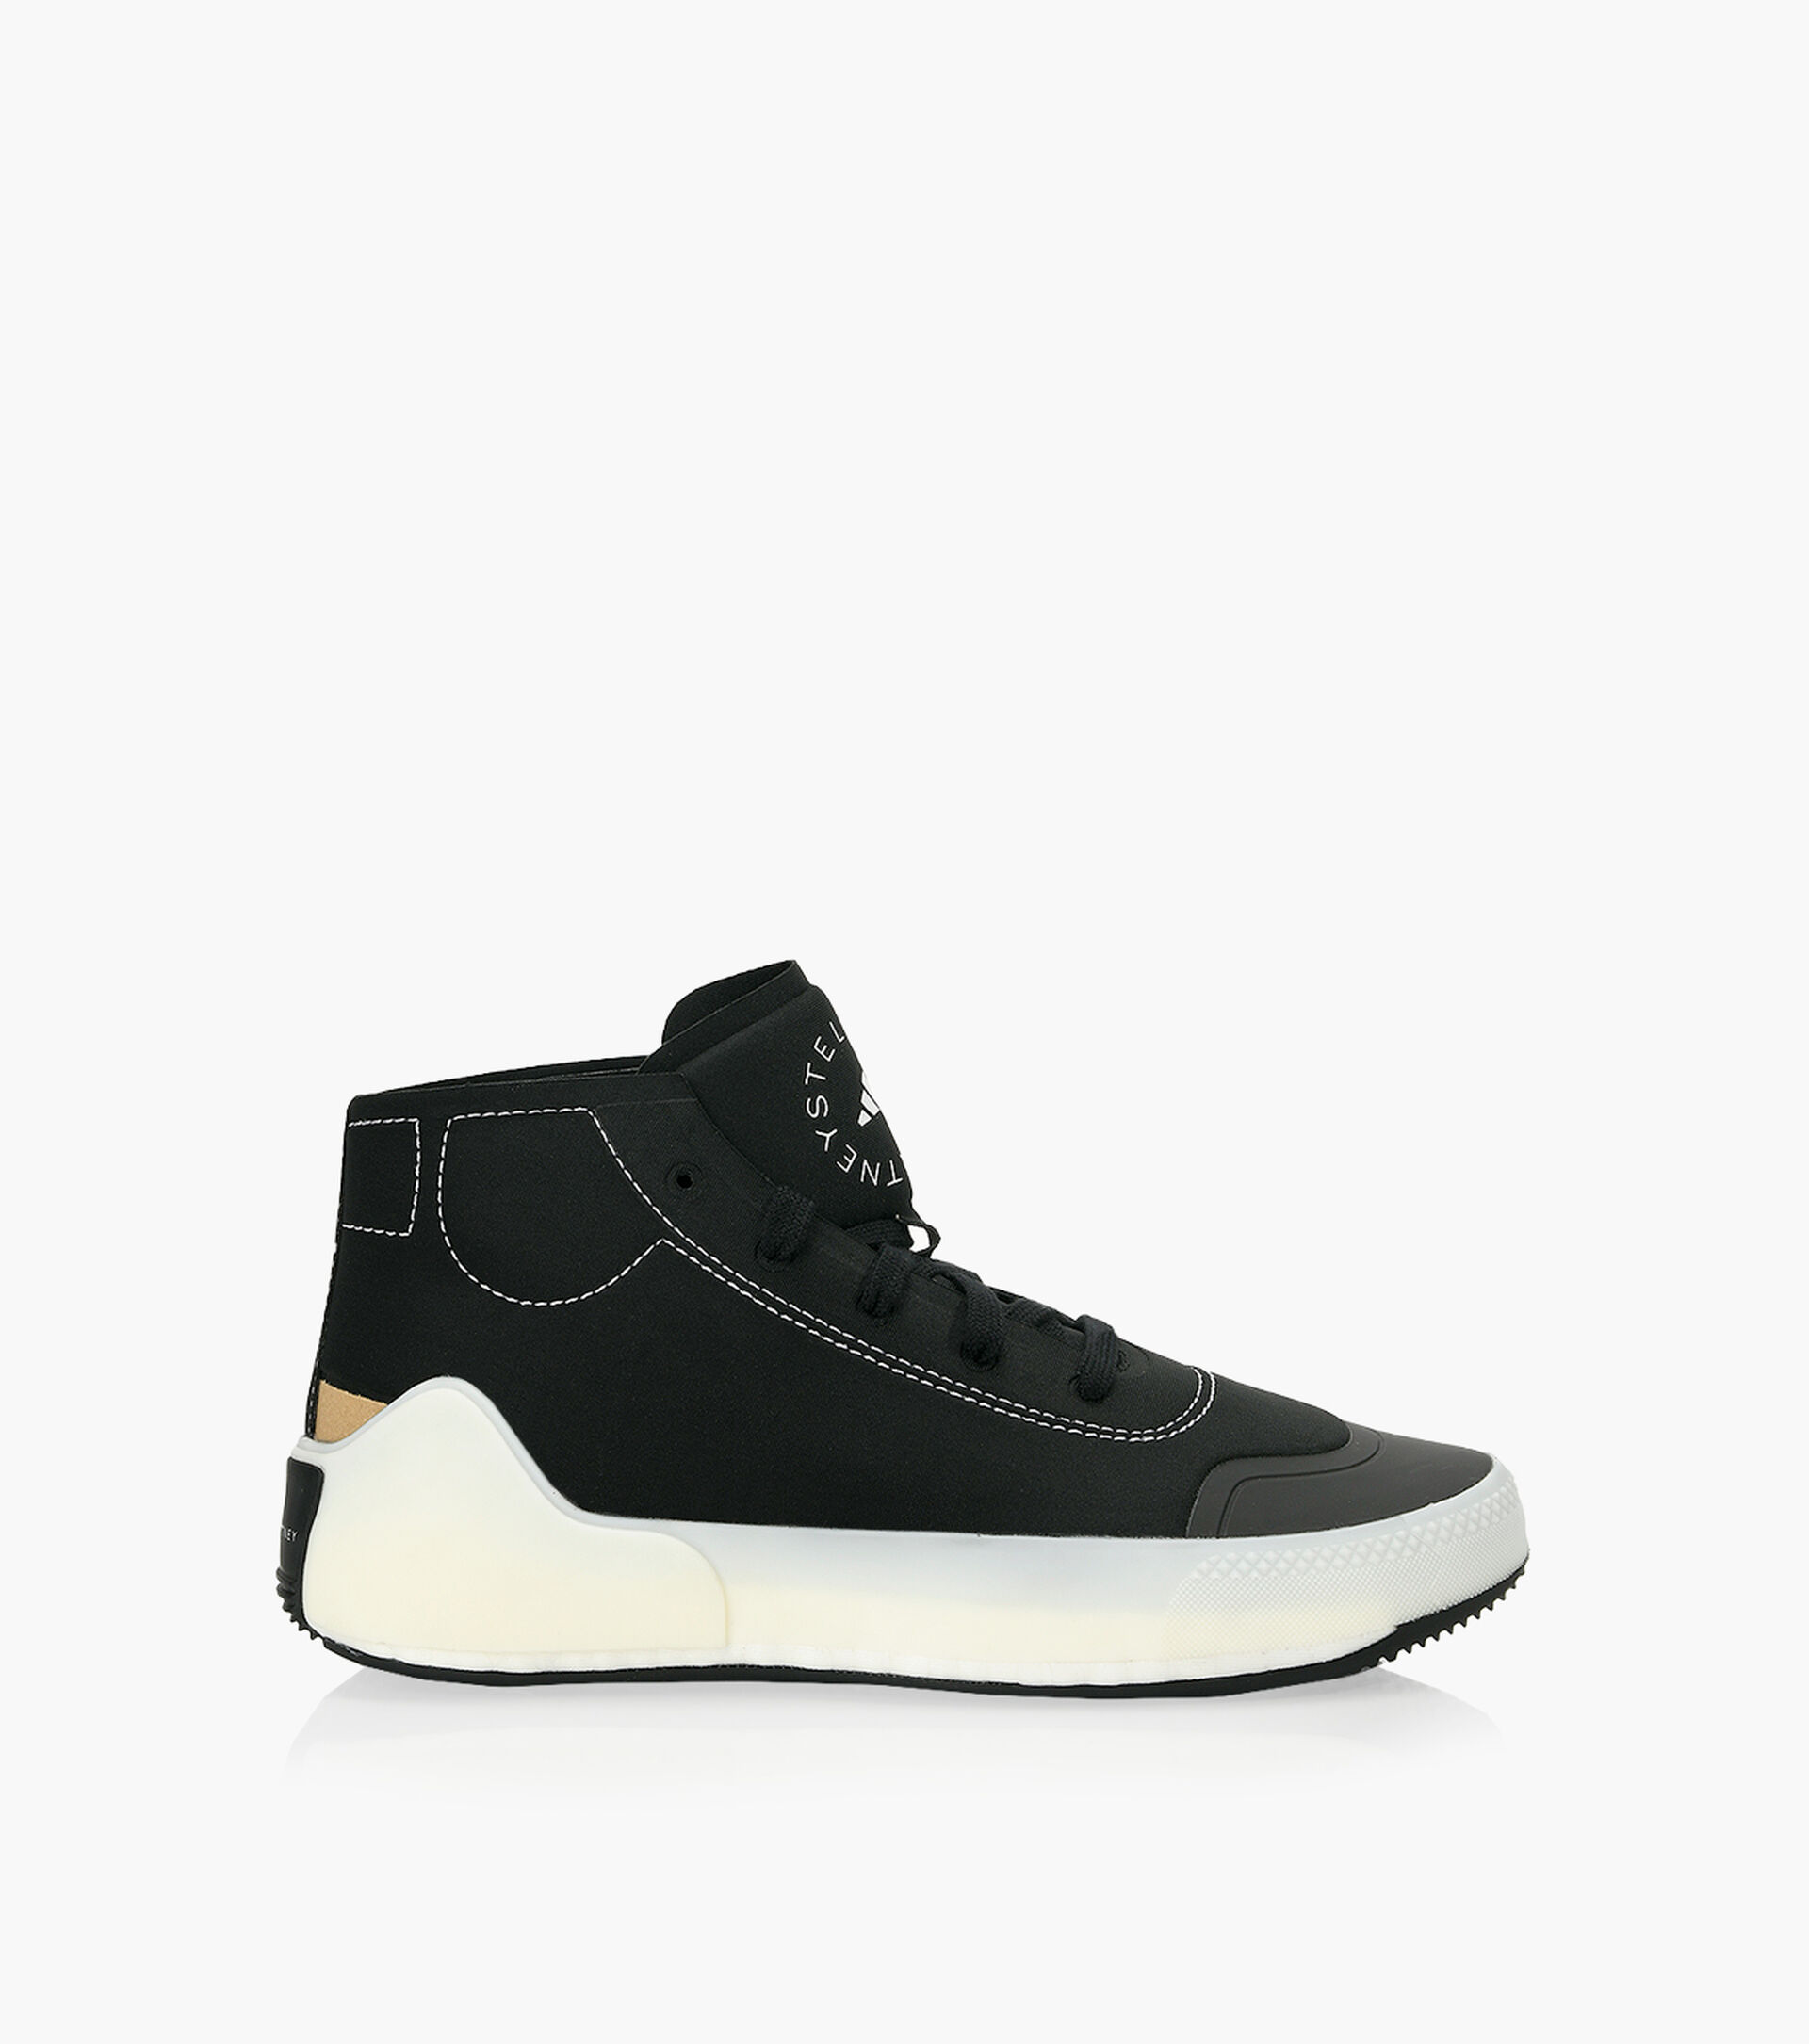 STELLA MCCARTNEY ADIDAS BY STELLA MCCARTNEY TREINO MID-CUT SHOES -  Synthetic | Browns Shoes